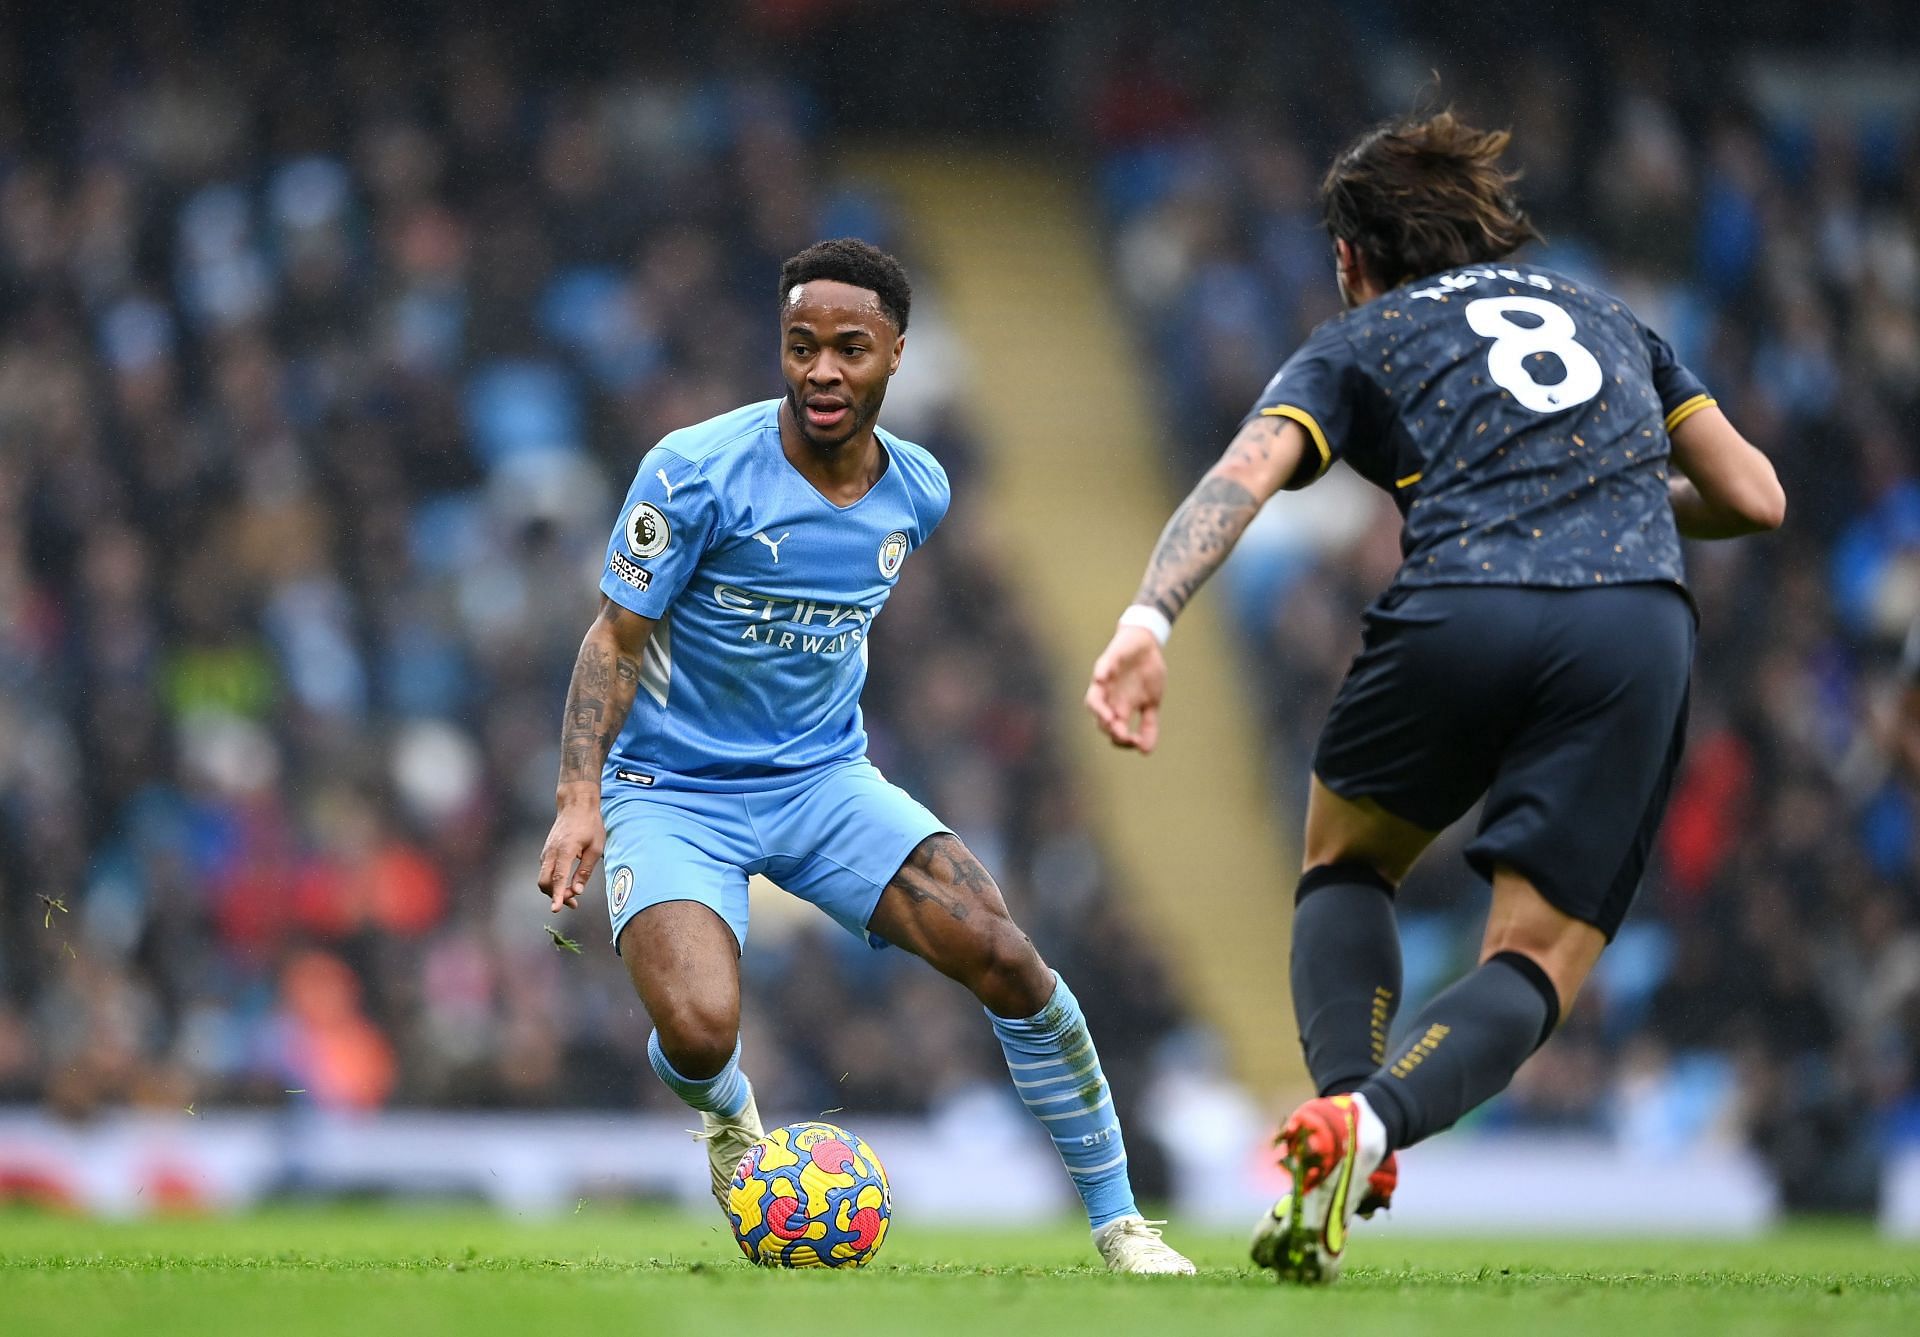 Sterling is the most recent player to score 100 league goals